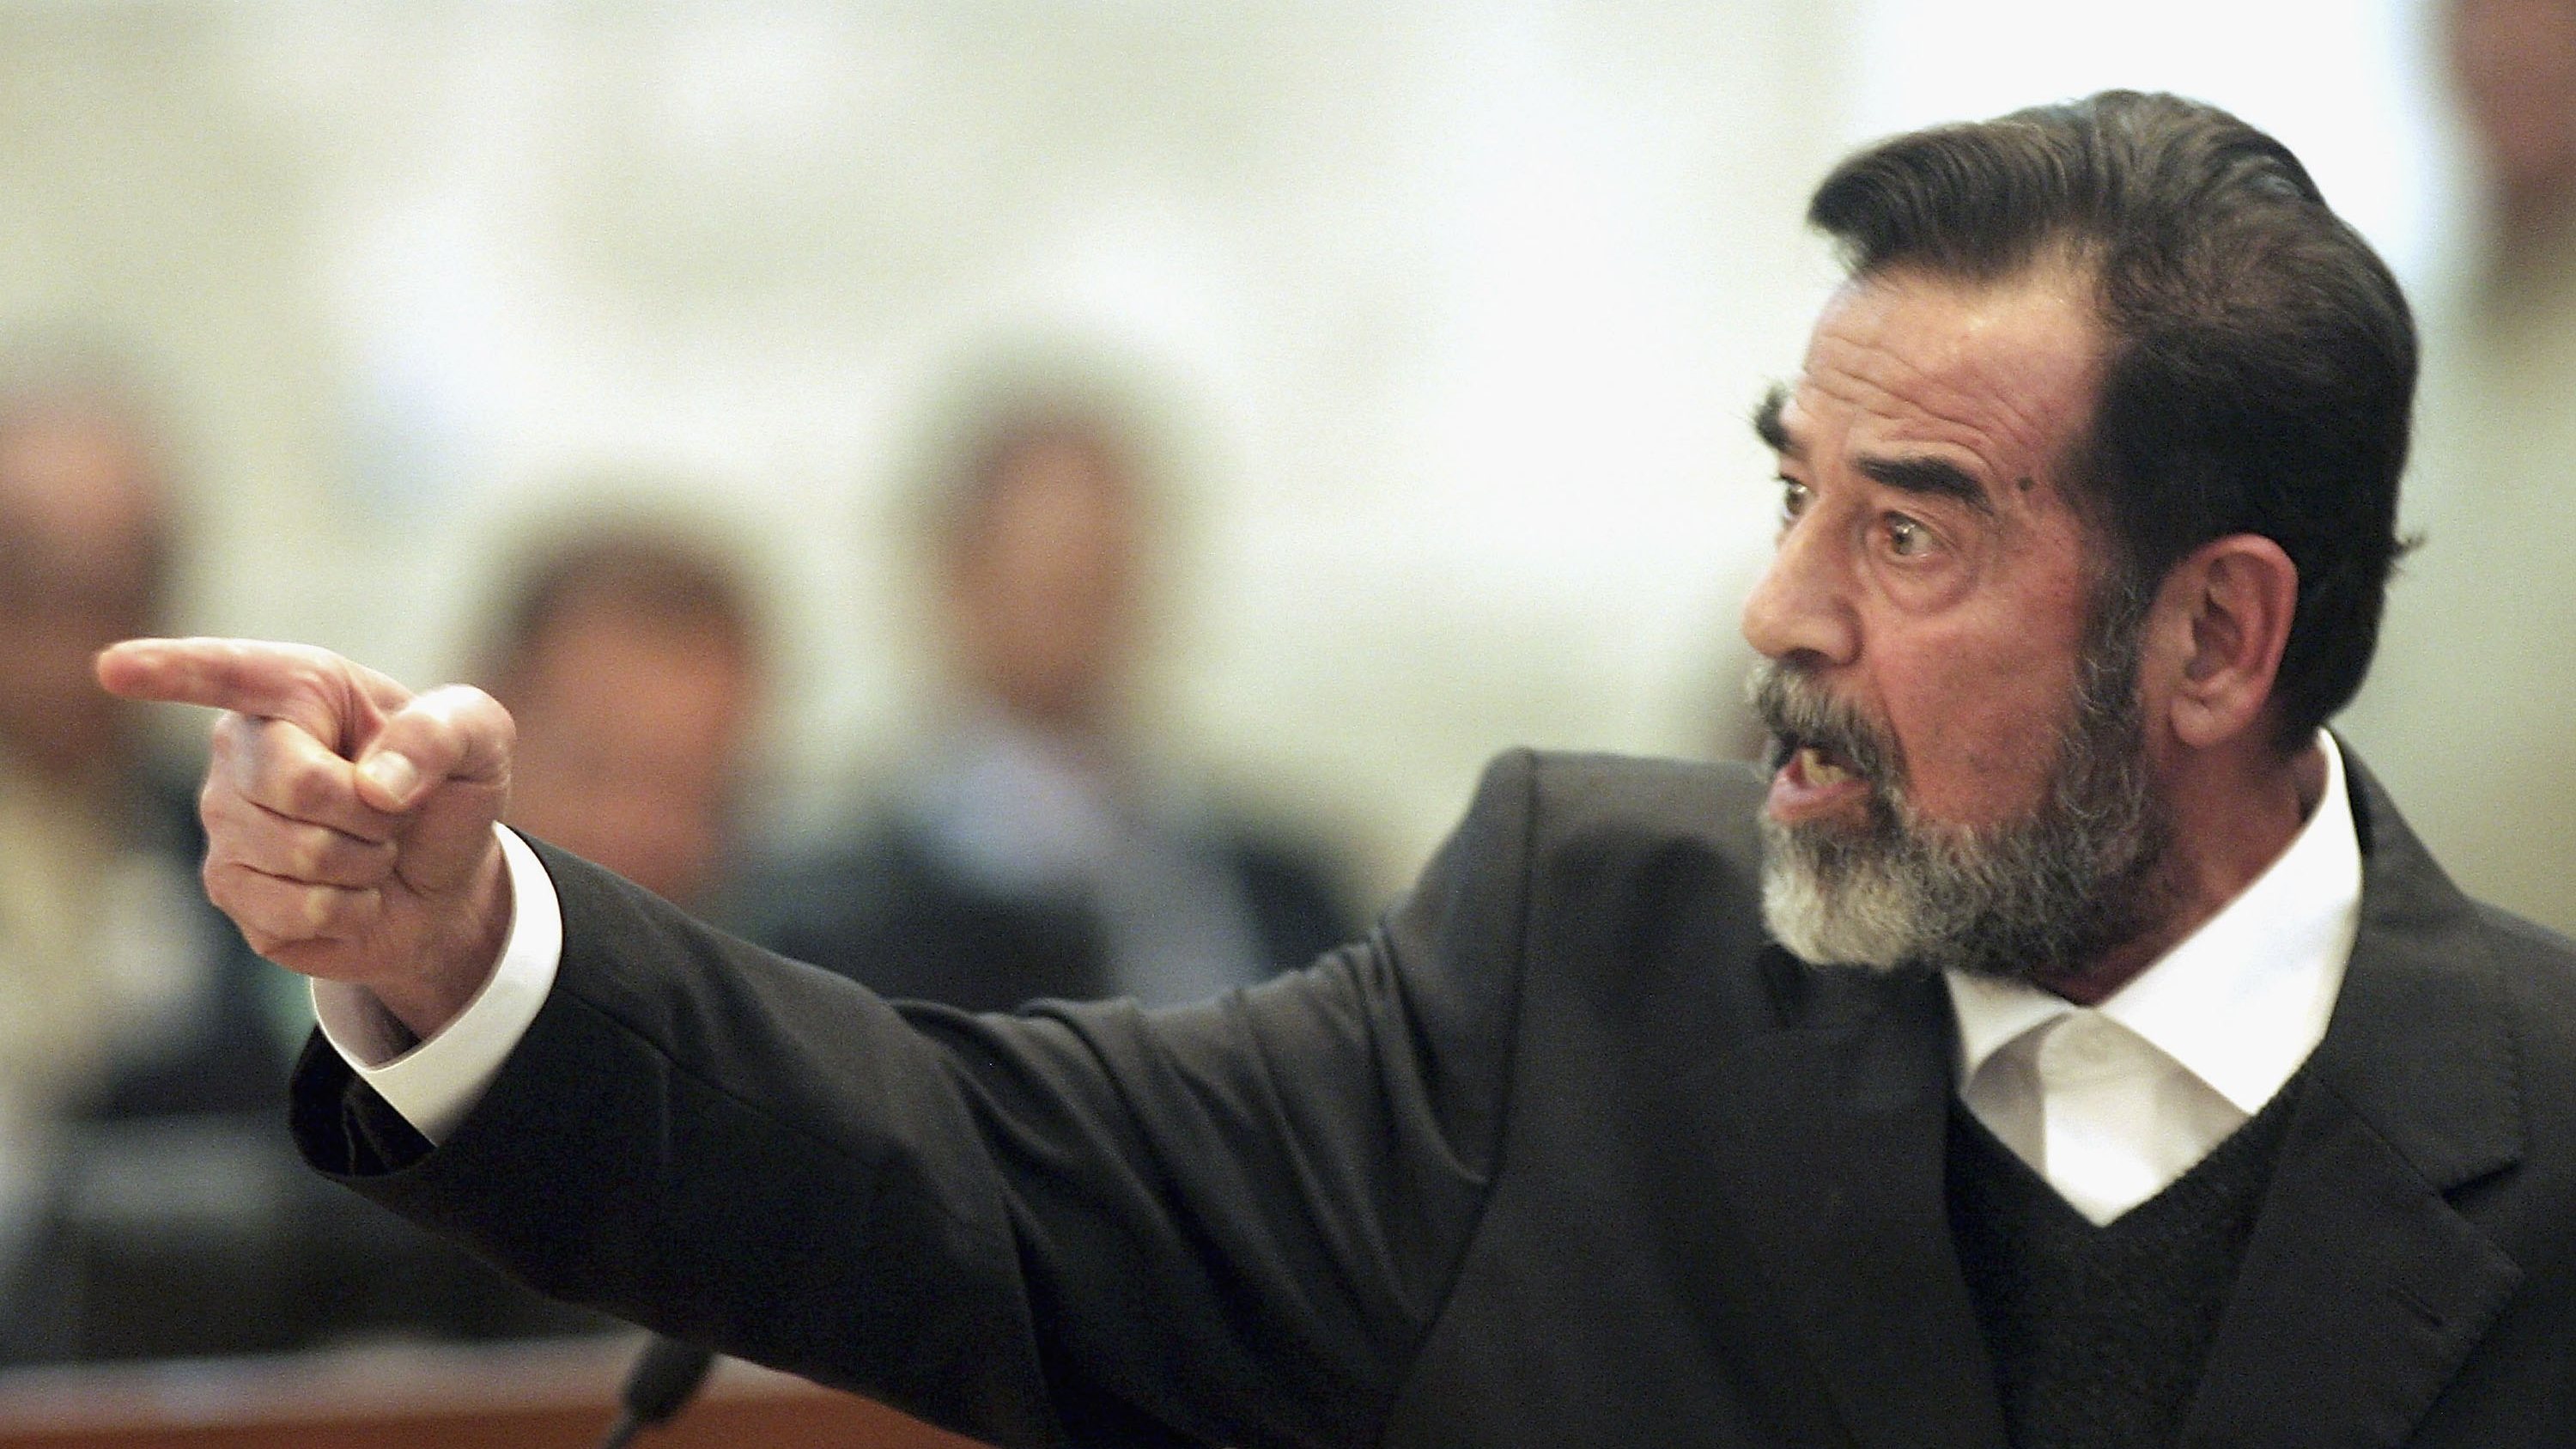 Saddam Hussein Trial Continues With New Judge